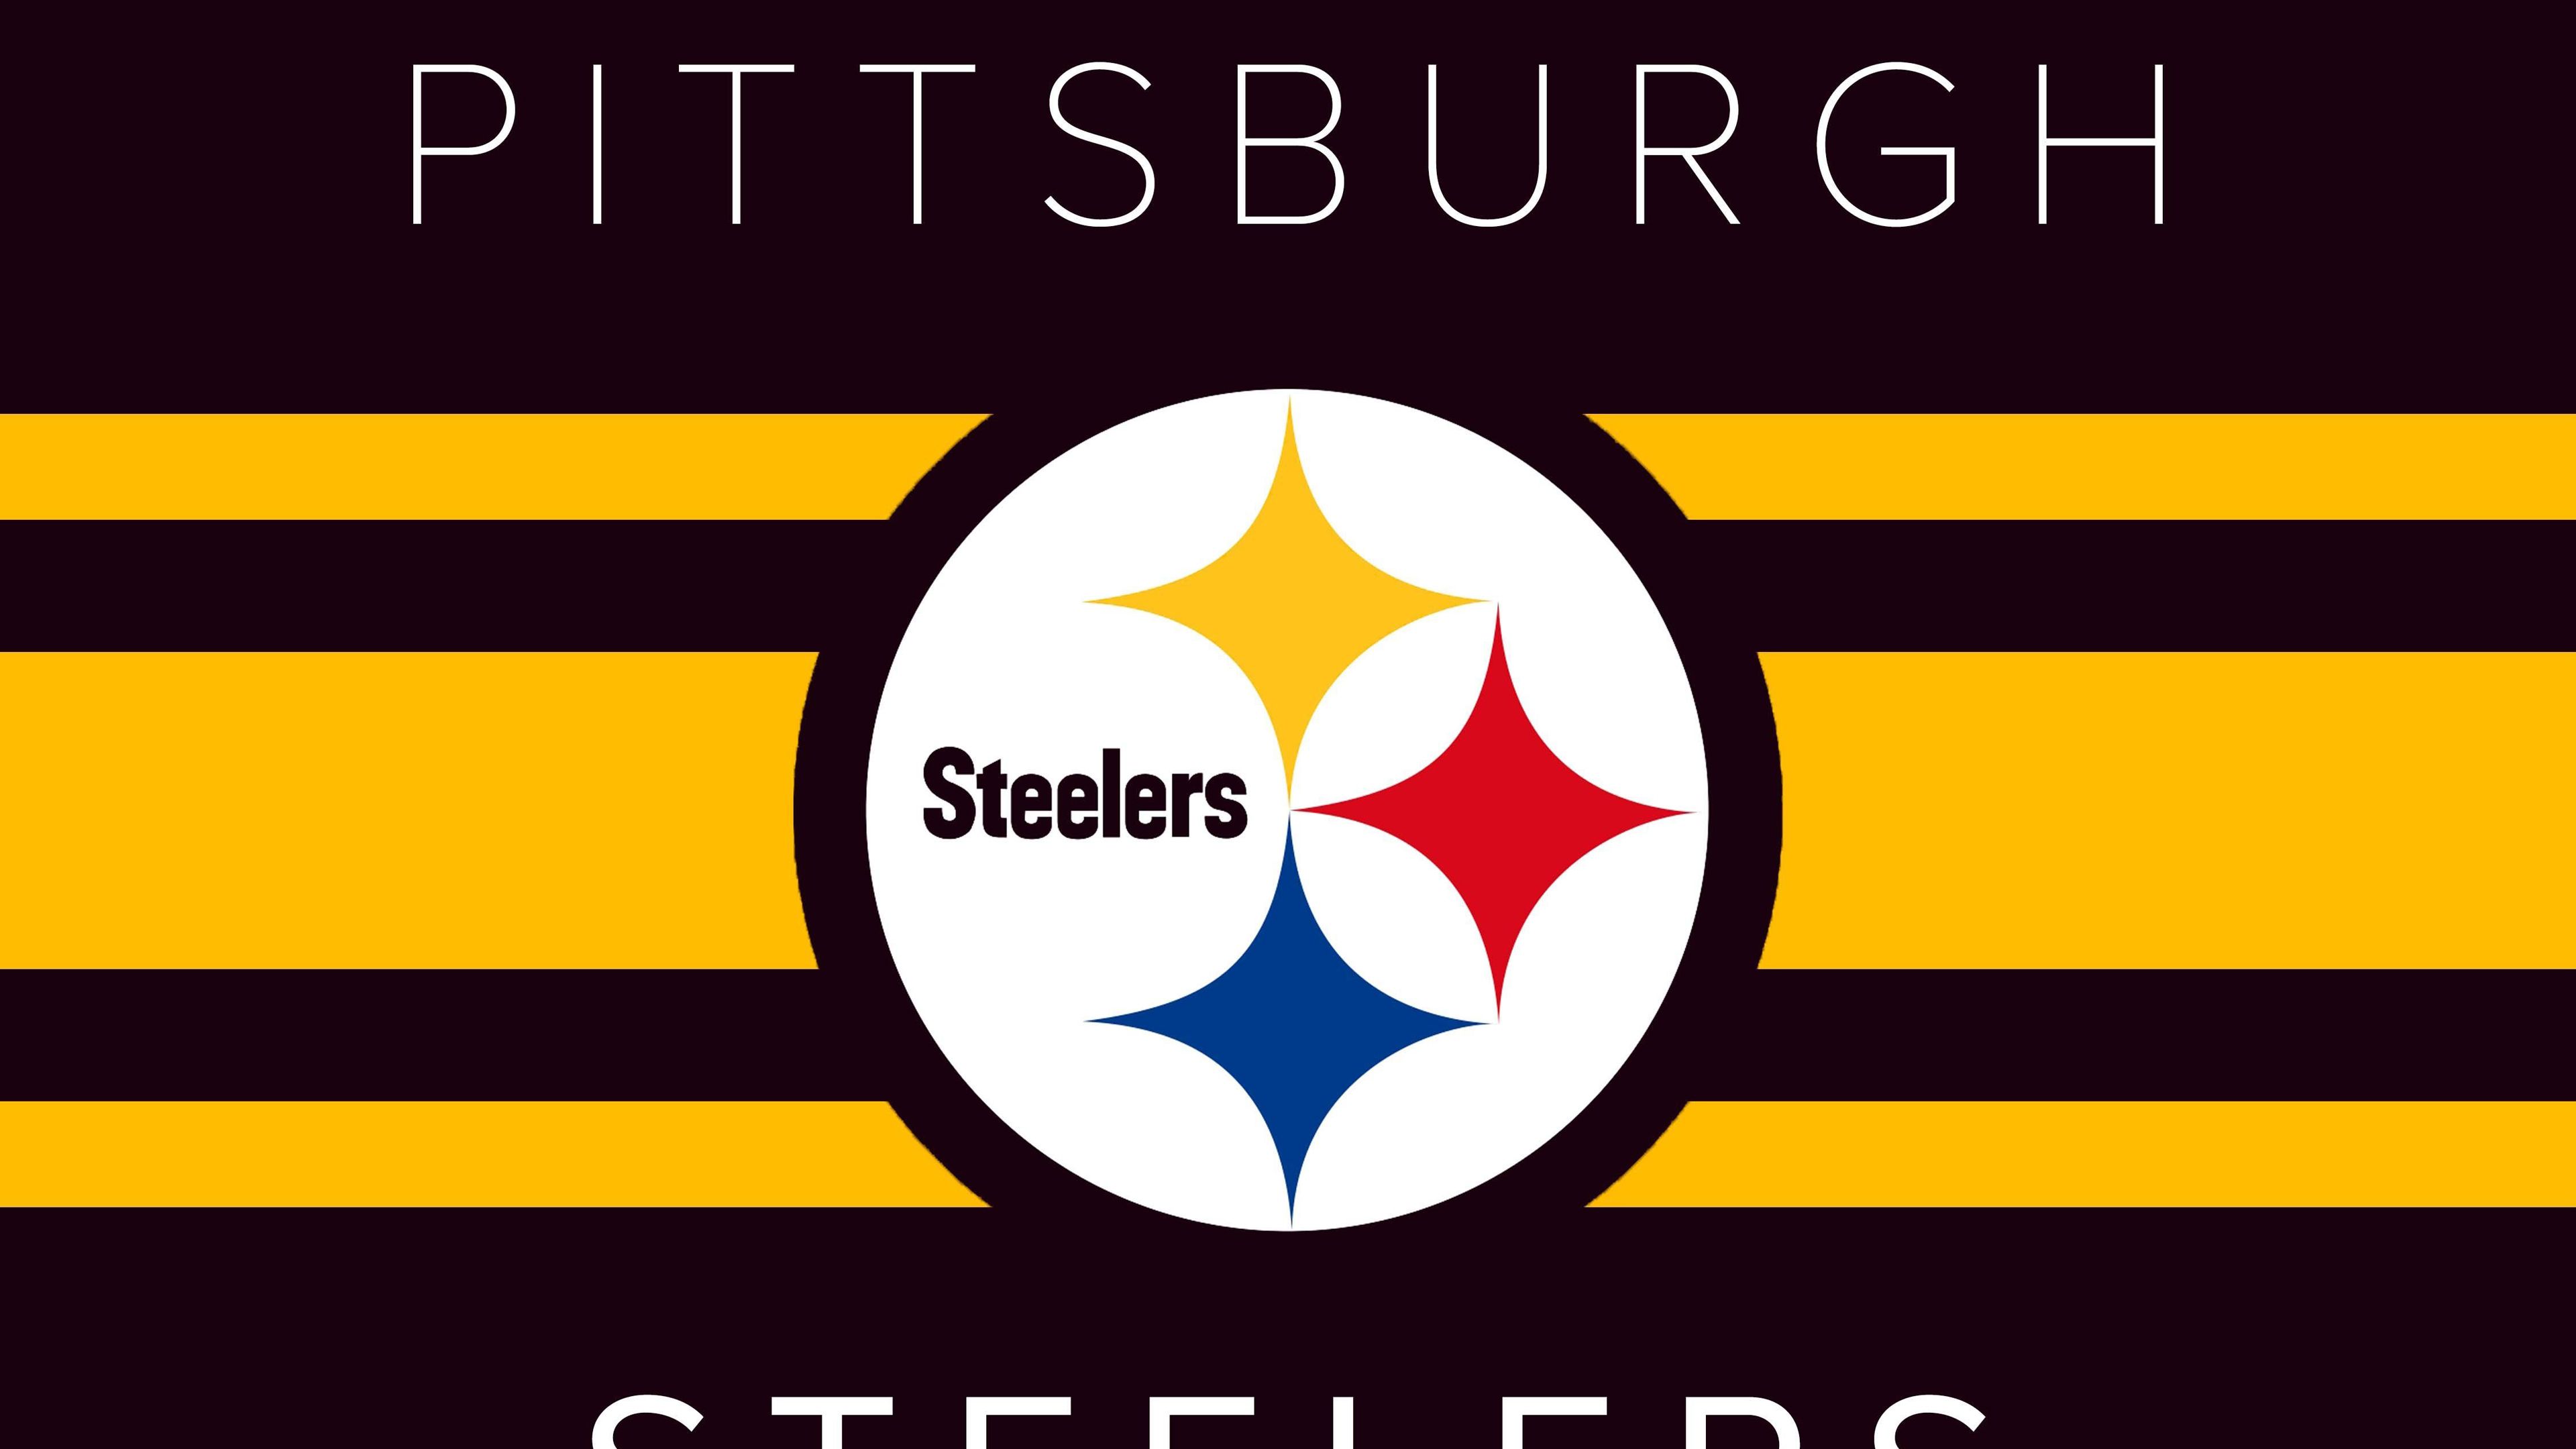 Pittsburgh Steelers With Maroon Background And Yellow Lines 4K HD Steelers Wallpaper